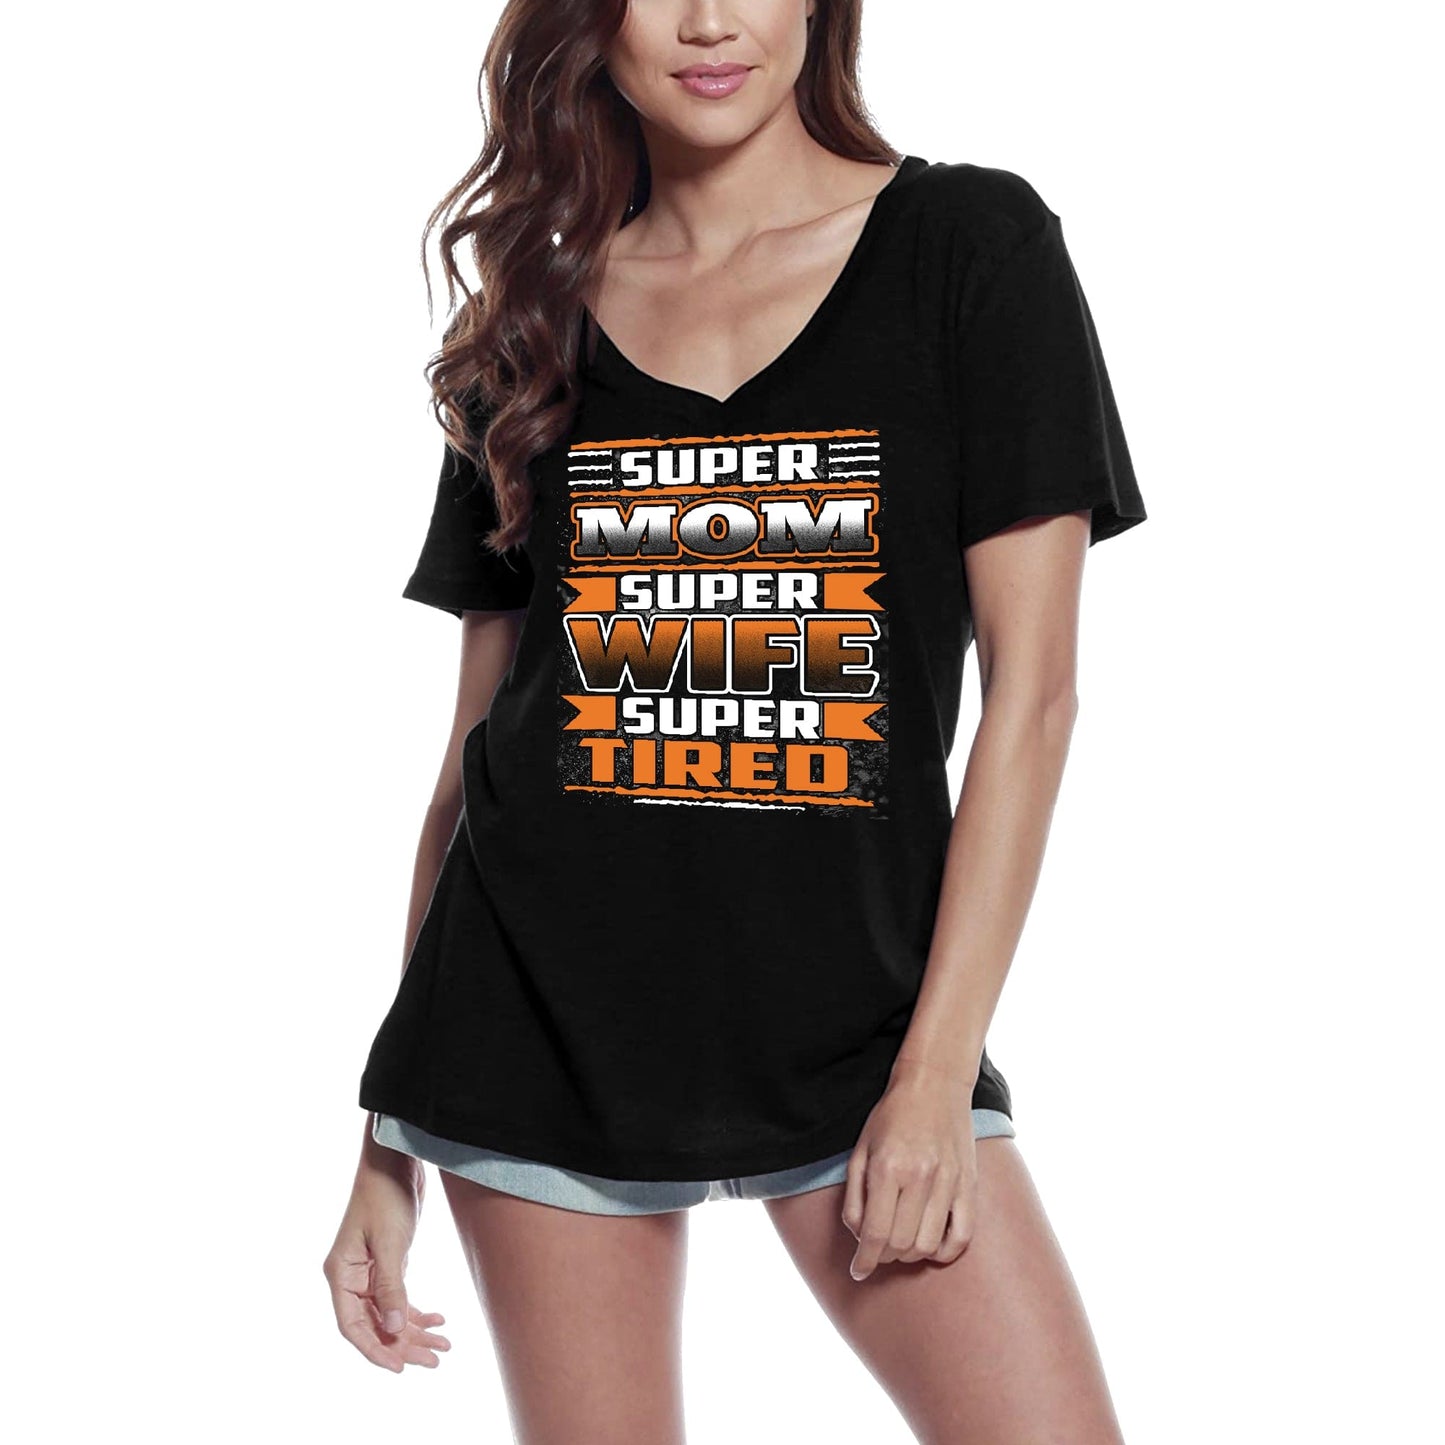 ULTRABASIC Women's T-Shirt Super Mom Super Wife Super Tired - Funny Mother's Sayings